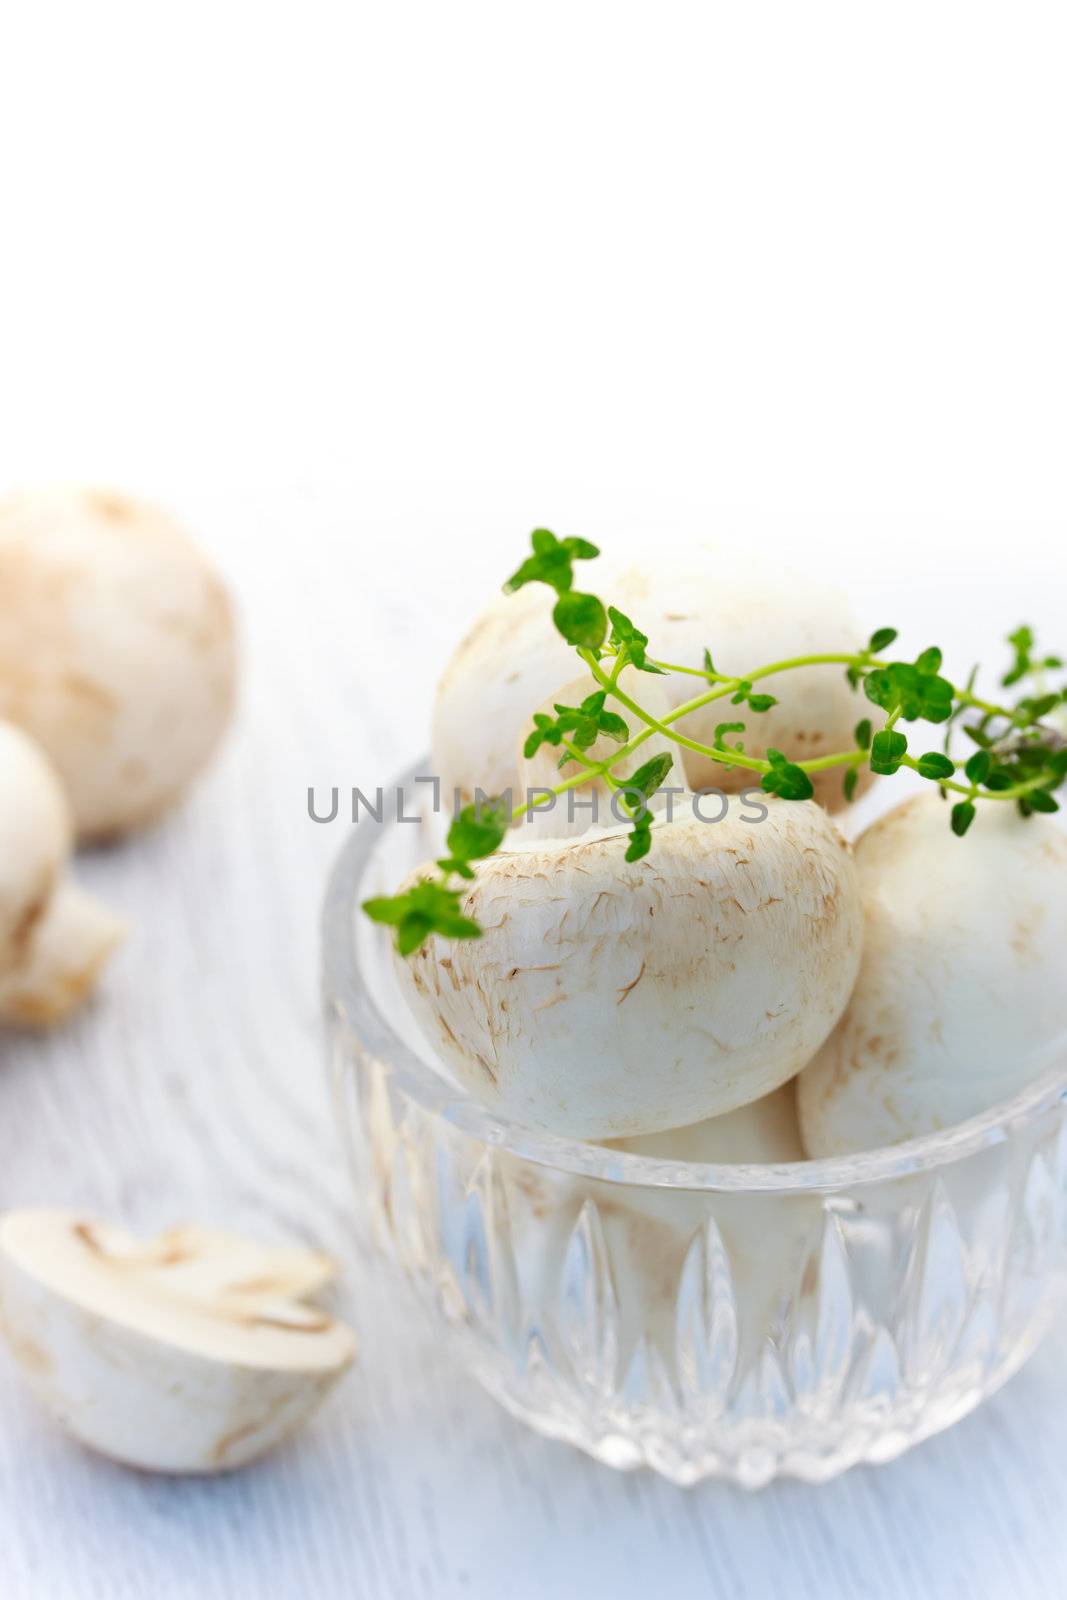 Mushrooms in the glass cup with thyme over white background